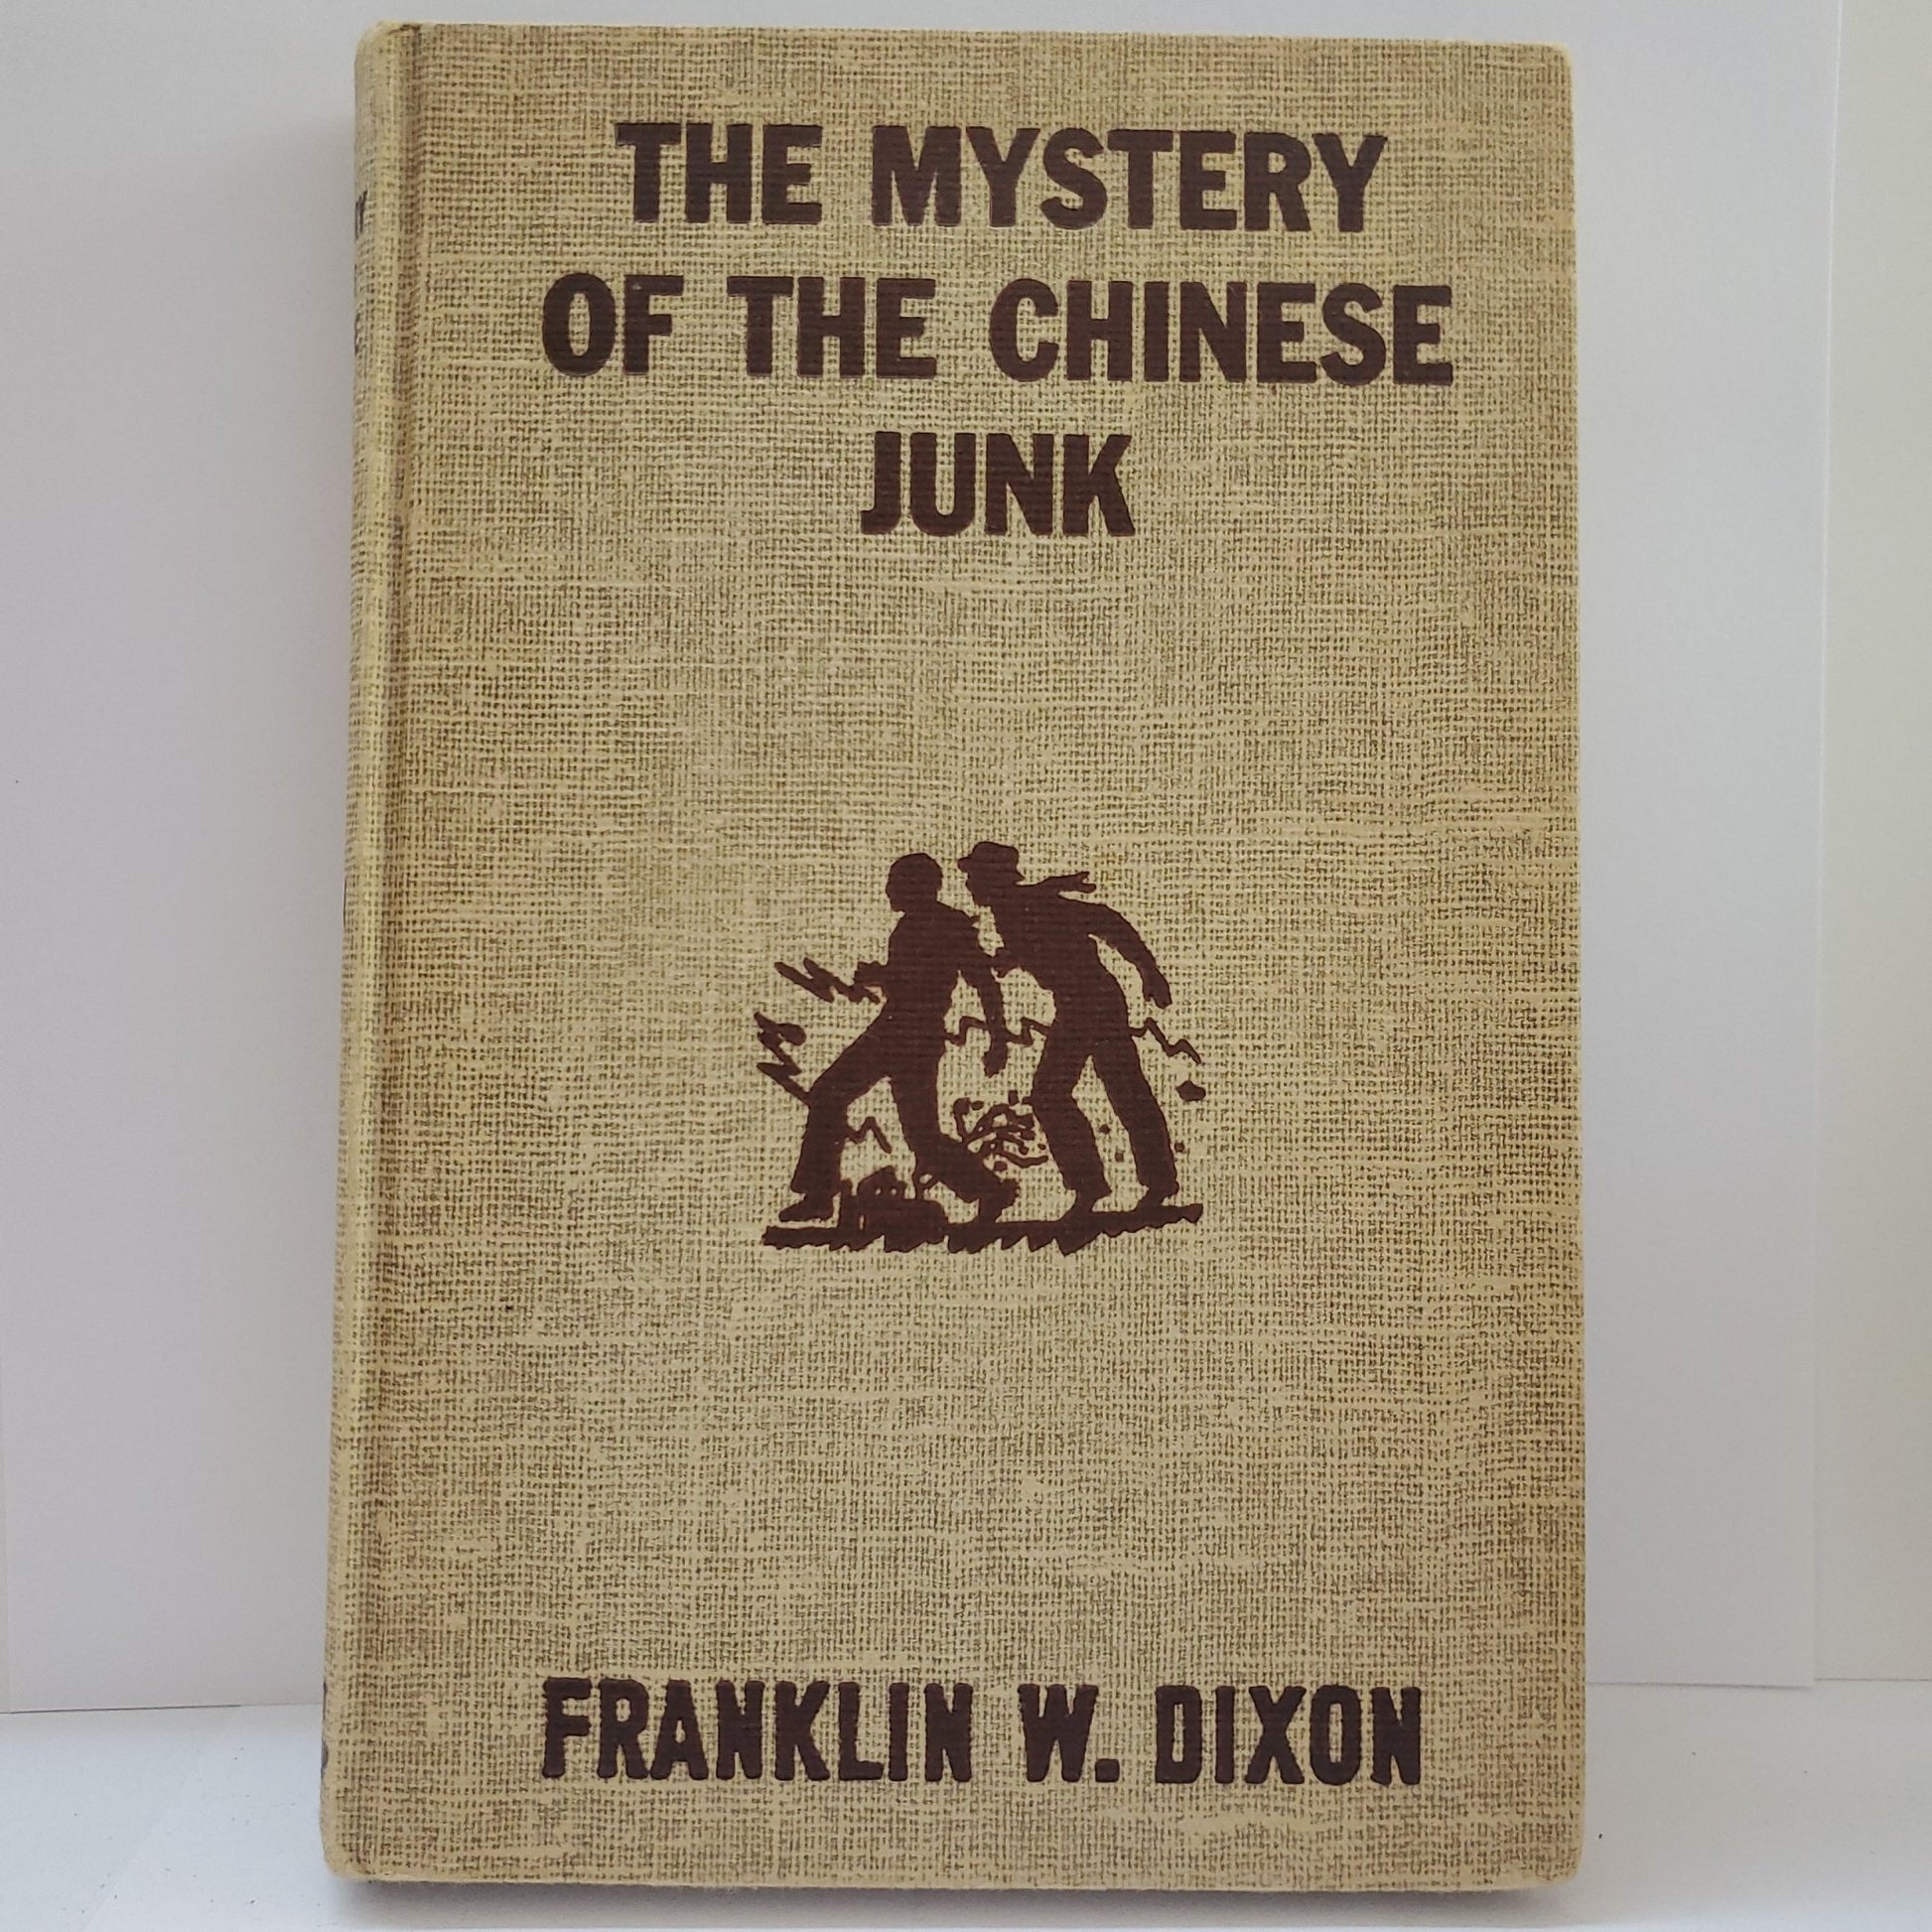 The Mystery of the Chinese Junk - [ash-ling] Booksellers